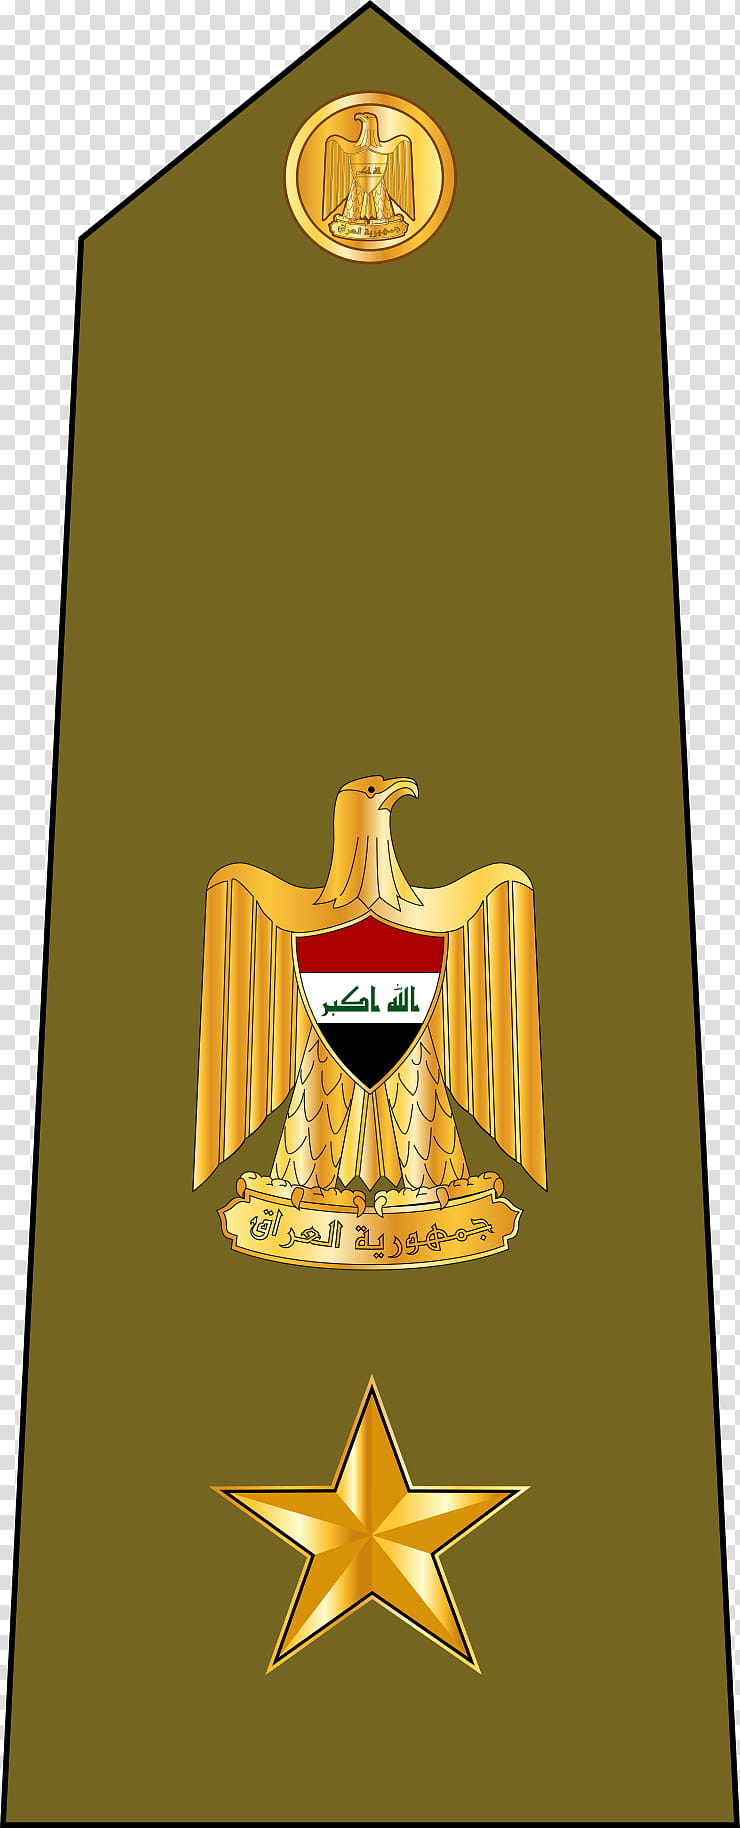 Army, Iraq, Iraqi Armed Forces, Military Rank, Iraqi Army, Iraqi Air Force, Major General, Colonel transparent background PNG clipart